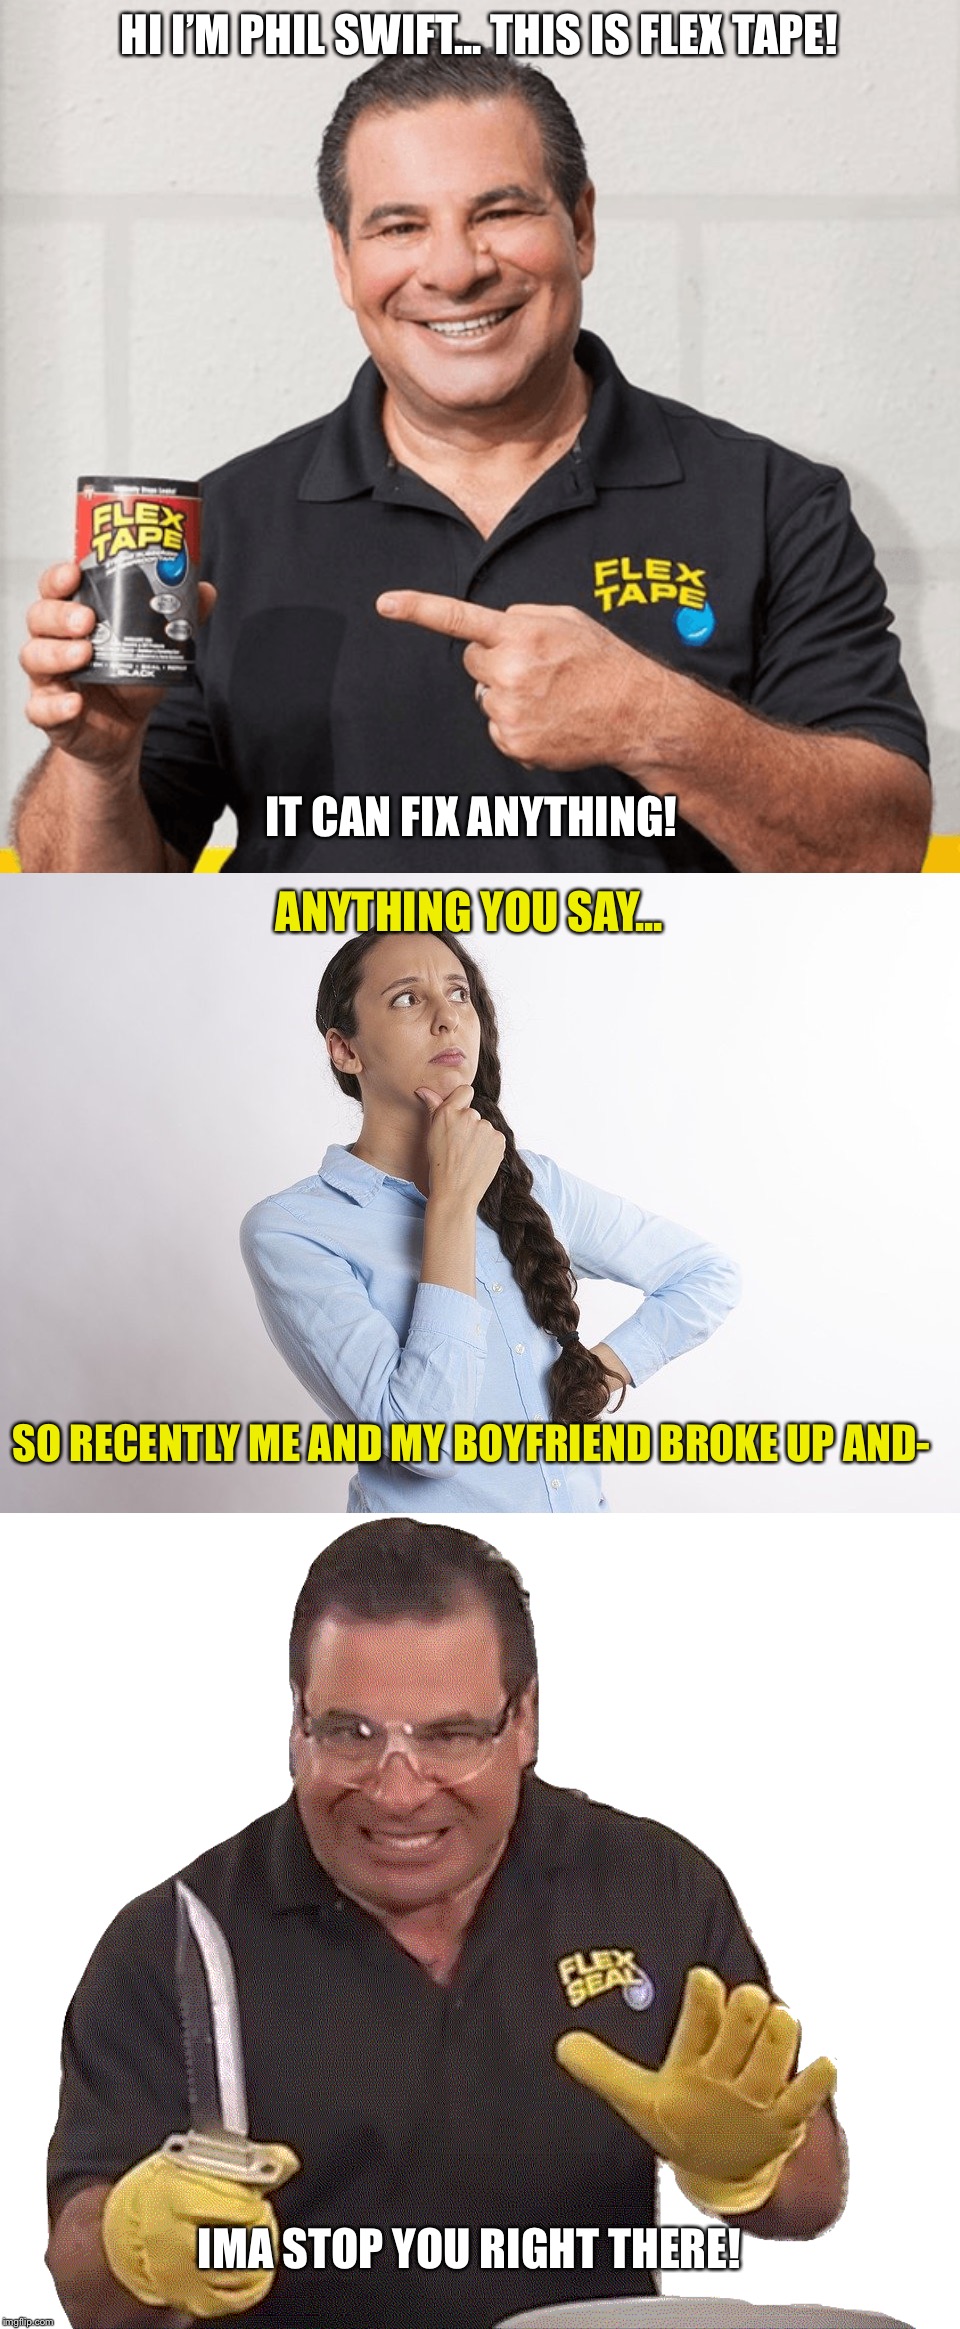 That’s alota damage | HI I’M PHIL SWIFT... THIS IS FLEX TAPE! IT CAN FIX ANYTHING! ANYTHING YOU SAY... SO RECENTLY ME AND MY BOYFRIEND BROKE UP AND-; IMA STOP YOU RIGHT THERE! | image tagged in memes,funny,funny memes,phil swift,flex tape | made w/ Imgflip meme maker